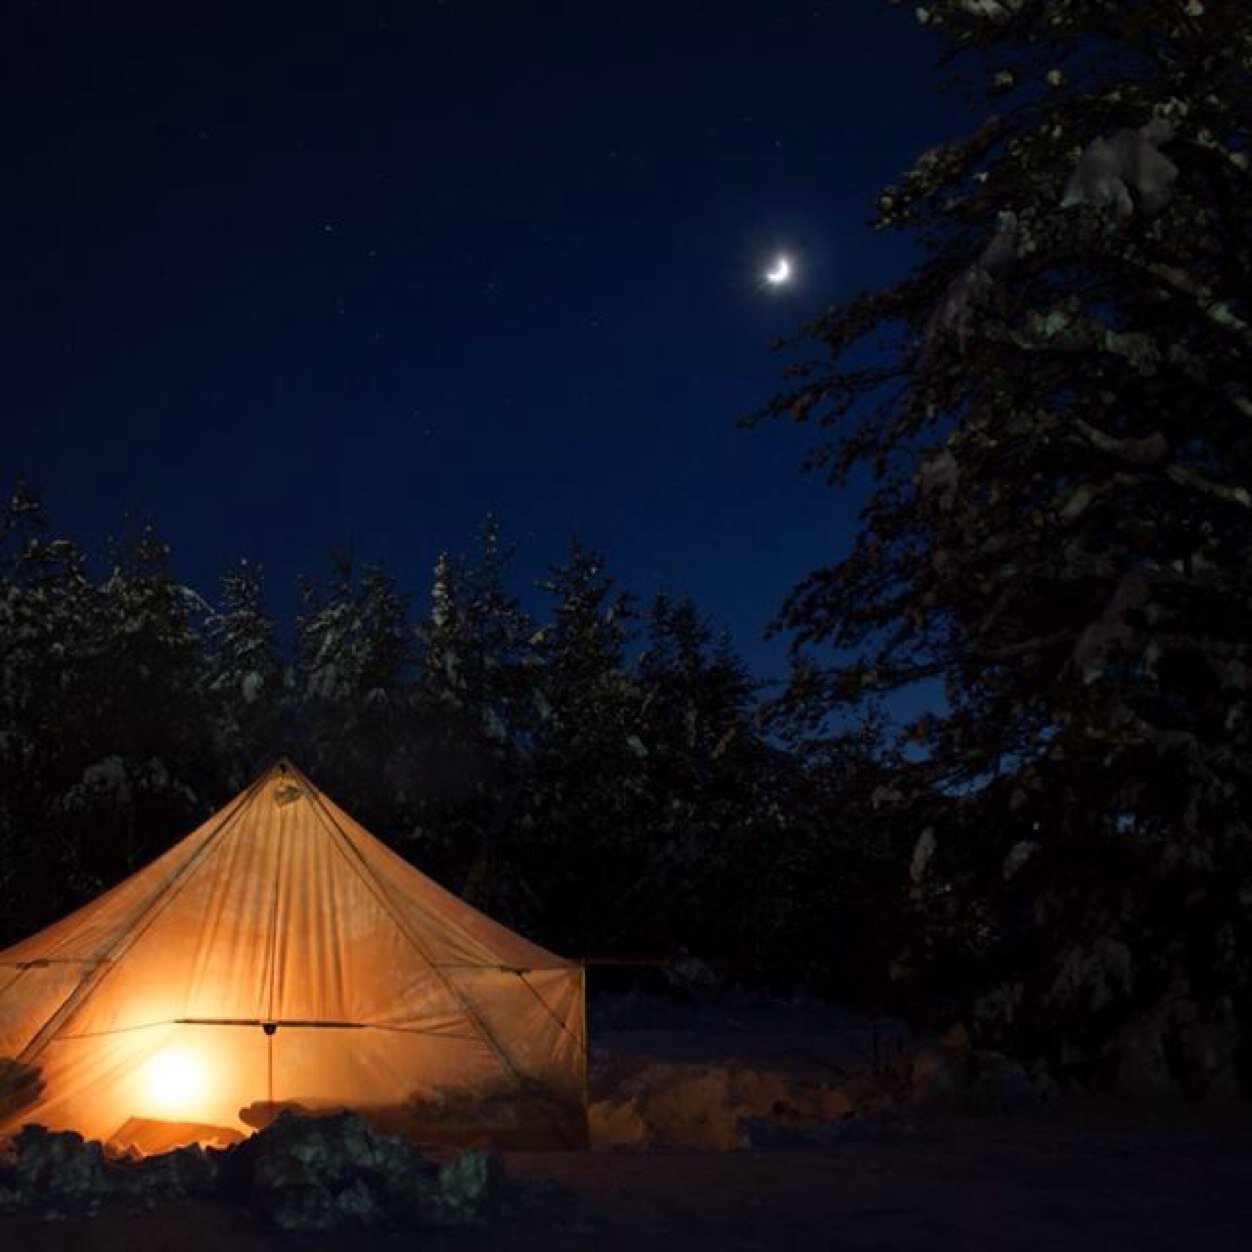 Snowtrekker tents manufactures light weight canvas tents for skiing, hunting and winter camping.